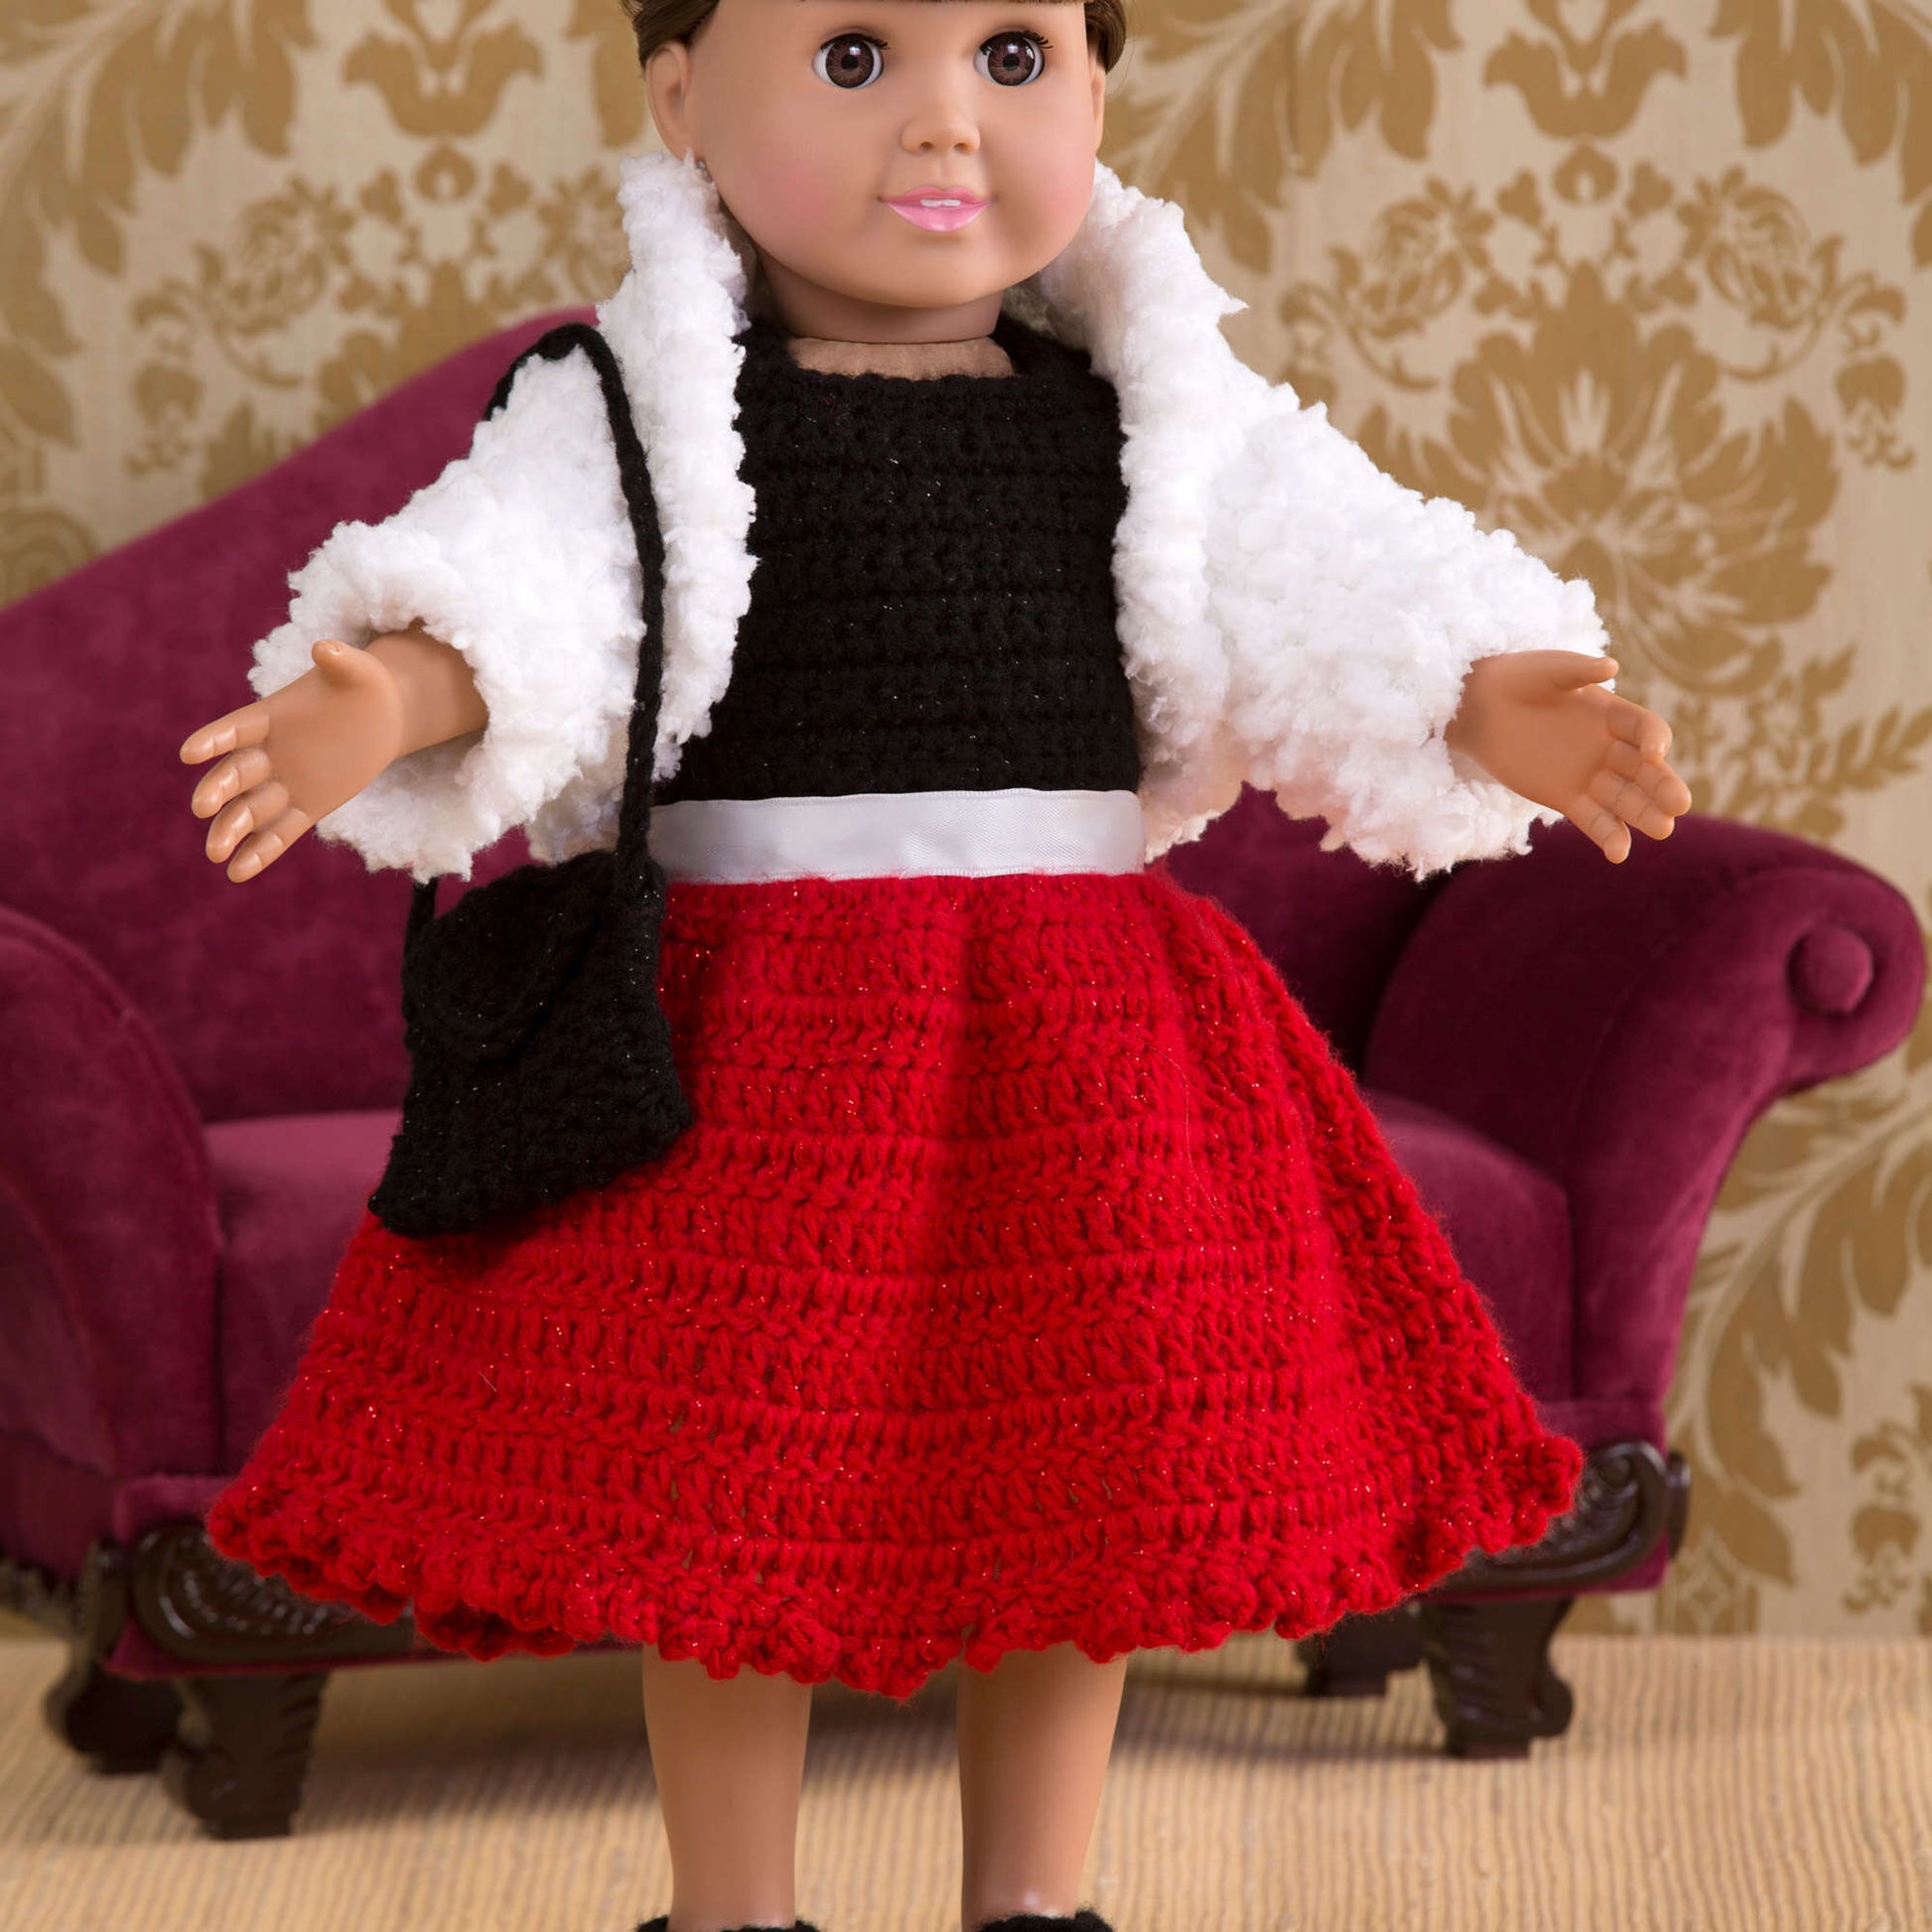 Free Red Heart Party Time Doll Outfit Crochet Pattern